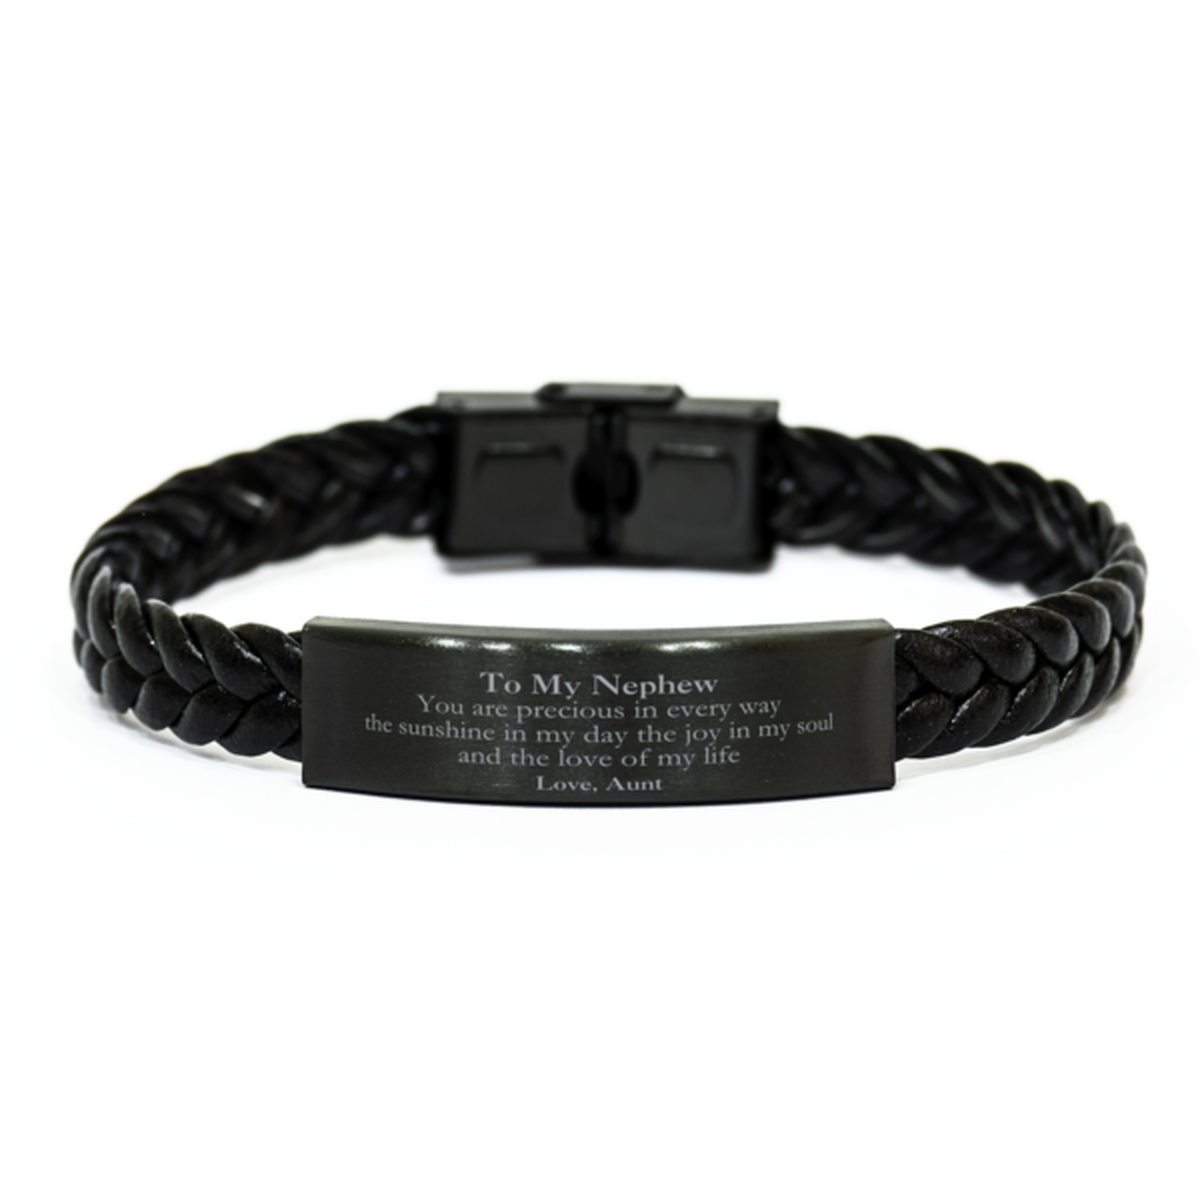 Graduation Gifts for Nephew Braided Leather Bracelet Present from Aunt, Christmas Nephew Birthday Gifts Nephew You are precious in every way the sunshine in my day. Love, Aunt